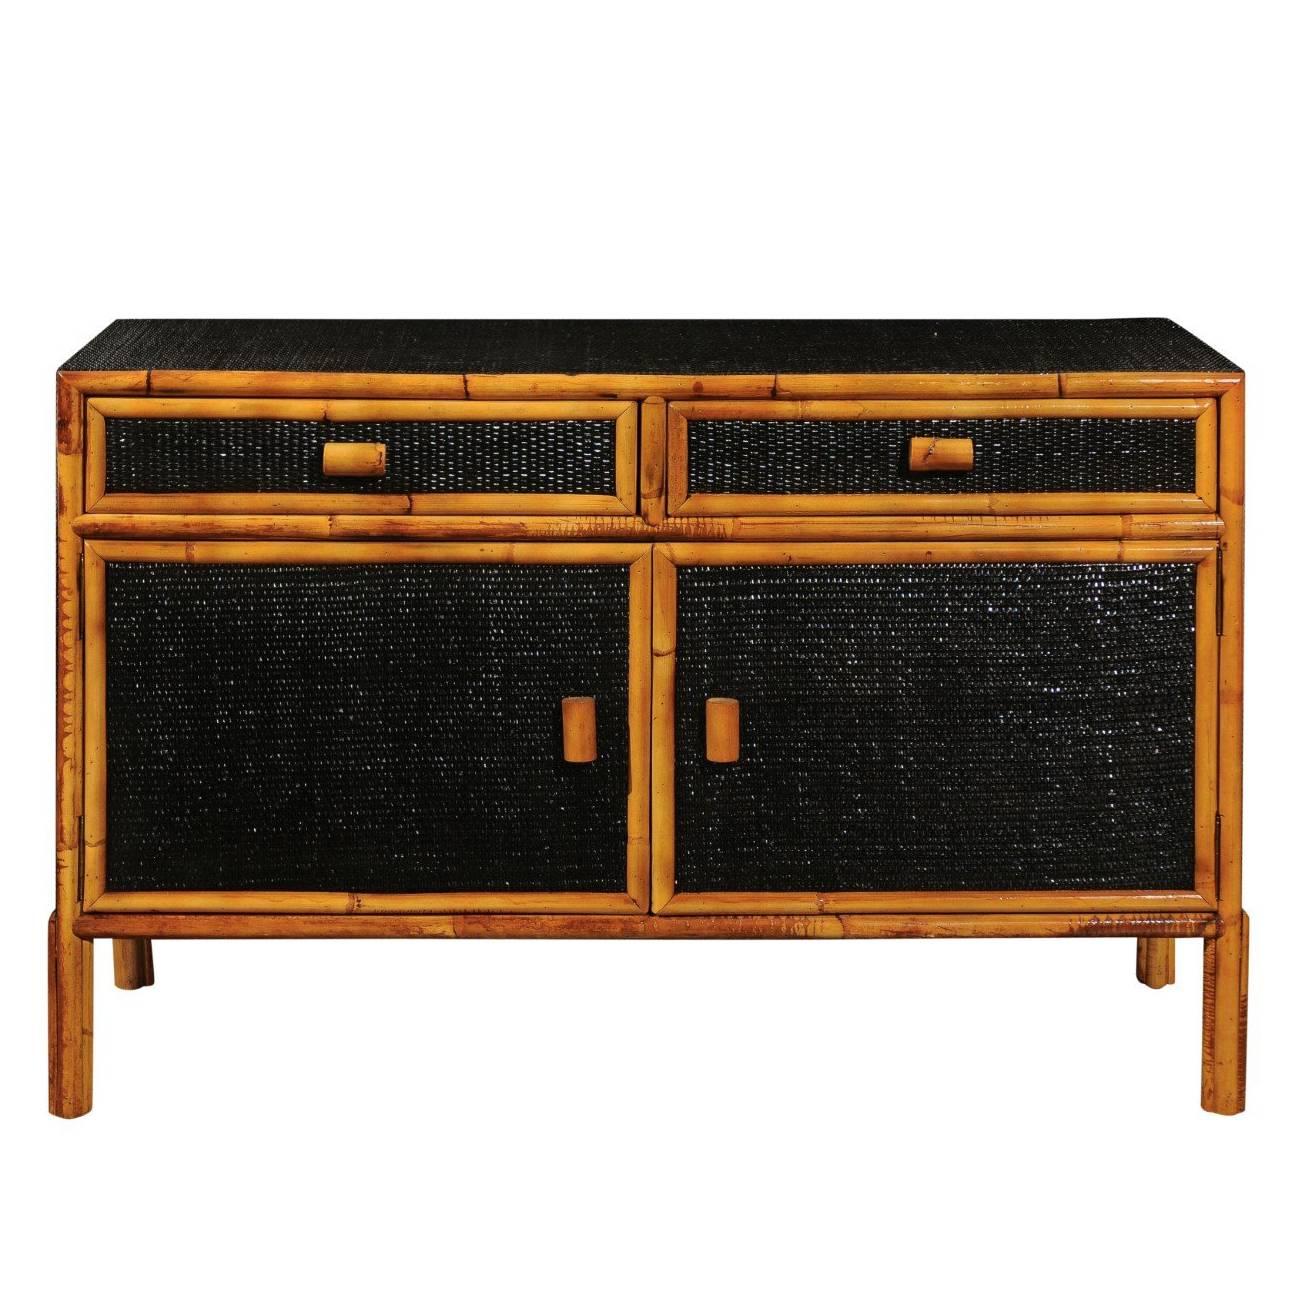 Elegant Vintage Black Lacquer Cane Cabinet with Bamboo Accents, circa 1970